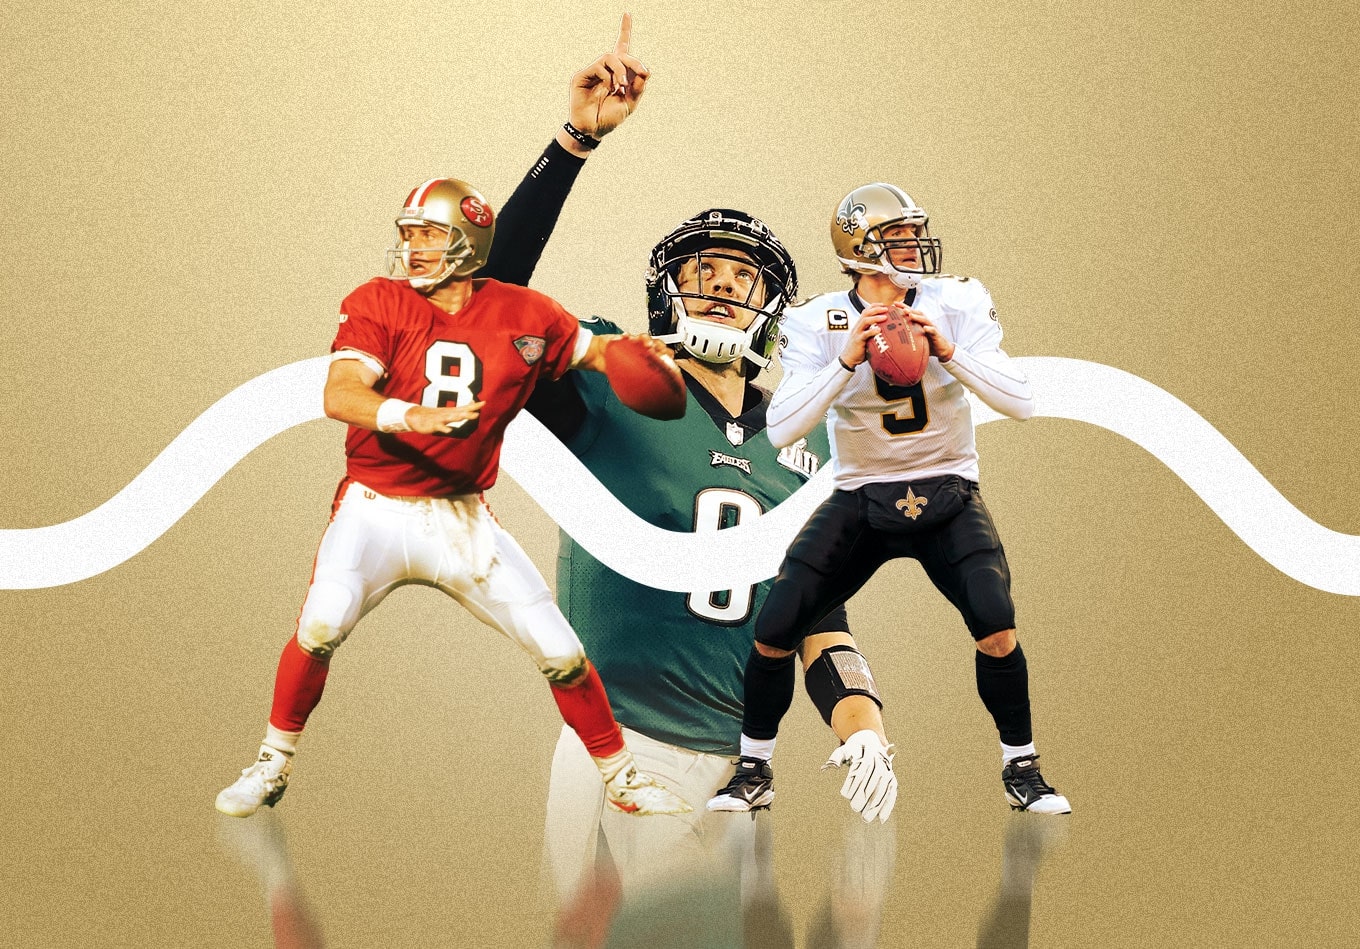 Airing It Out: The Highest-Scoring Games in NFL History